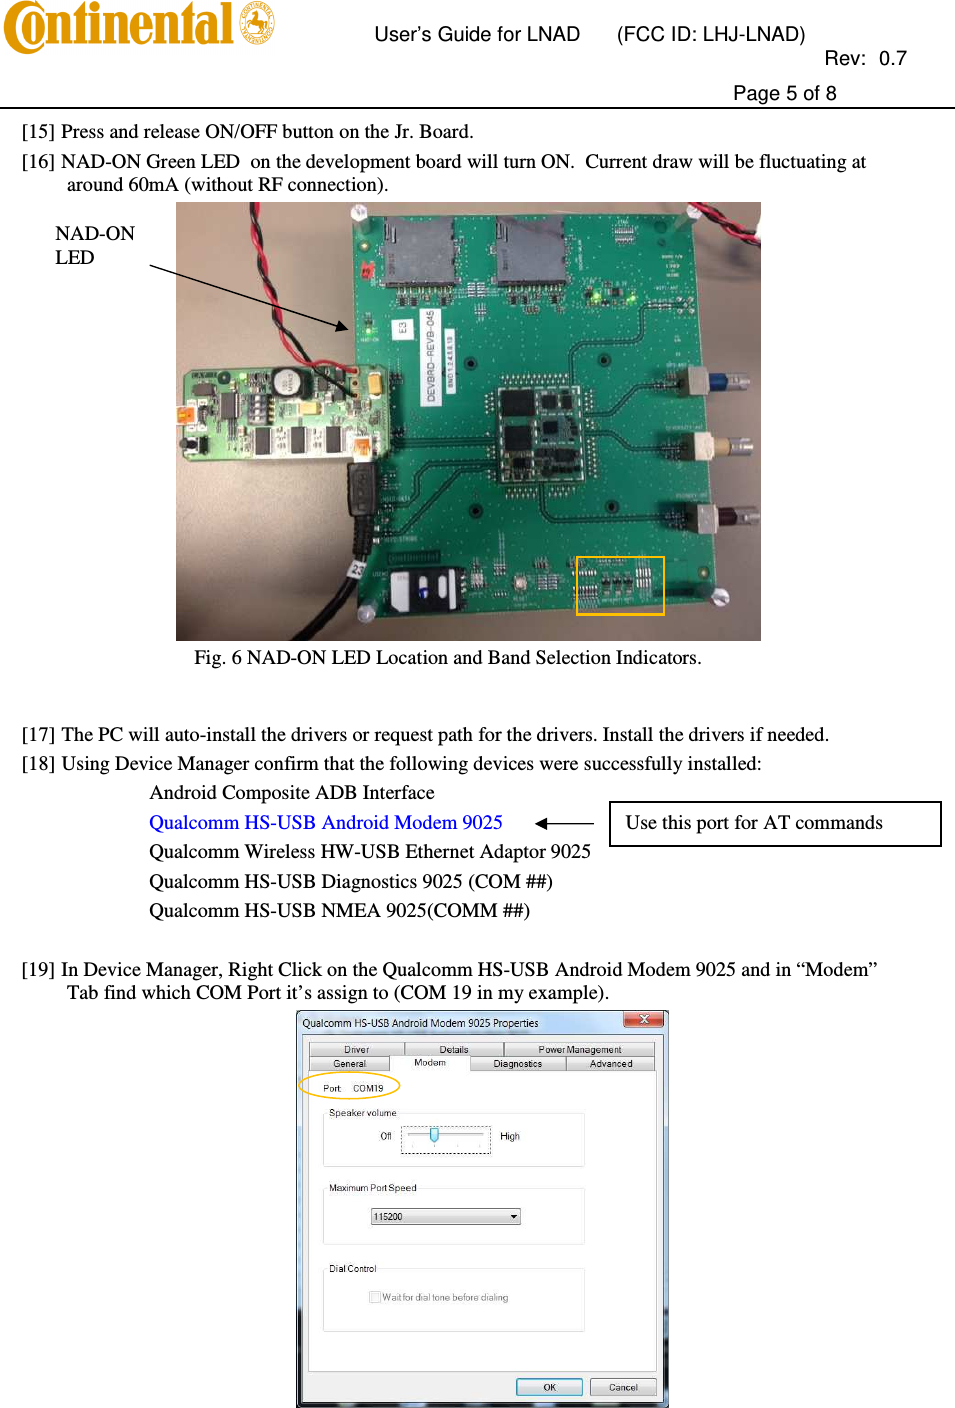       User’s Guide for LNAD  (FCC ID: LHJ-LNAD)          Rev:  0.7     Page 5 of 8  [15] Press and release ON/OFF button on the Jr. Board.  [16] NAD-ON Green LED  on the development board will turn ON.  Current draw will be fluctuating at around 60mA (without RF connection).  Fig. 6 NAD-ON LED Location and Band Selection Indicators.   [17] The PC will auto-install the drivers or request path for the drivers. Install the drivers if needed.  [18] Using Device Manager confirm that the following devices were successfully installed: Android Composite ADB Interface Qualcomm HS-USB Android Modem 9025   Qualcomm Wireless HW-USB Ethernet Adaptor 9025 Qualcomm HS-USB Diagnostics 9025 (COM ##) Qualcomm HS-USB NMEA 9025(COMM ##)  [19] In Device Manager, Right Click on the Qualcomm HS-USB Android Modem 9025 and in “Modem” Tab find which COM Port it’s assign to (COM 19 in my example).  NAD-ON LED Use this port for AT commands 